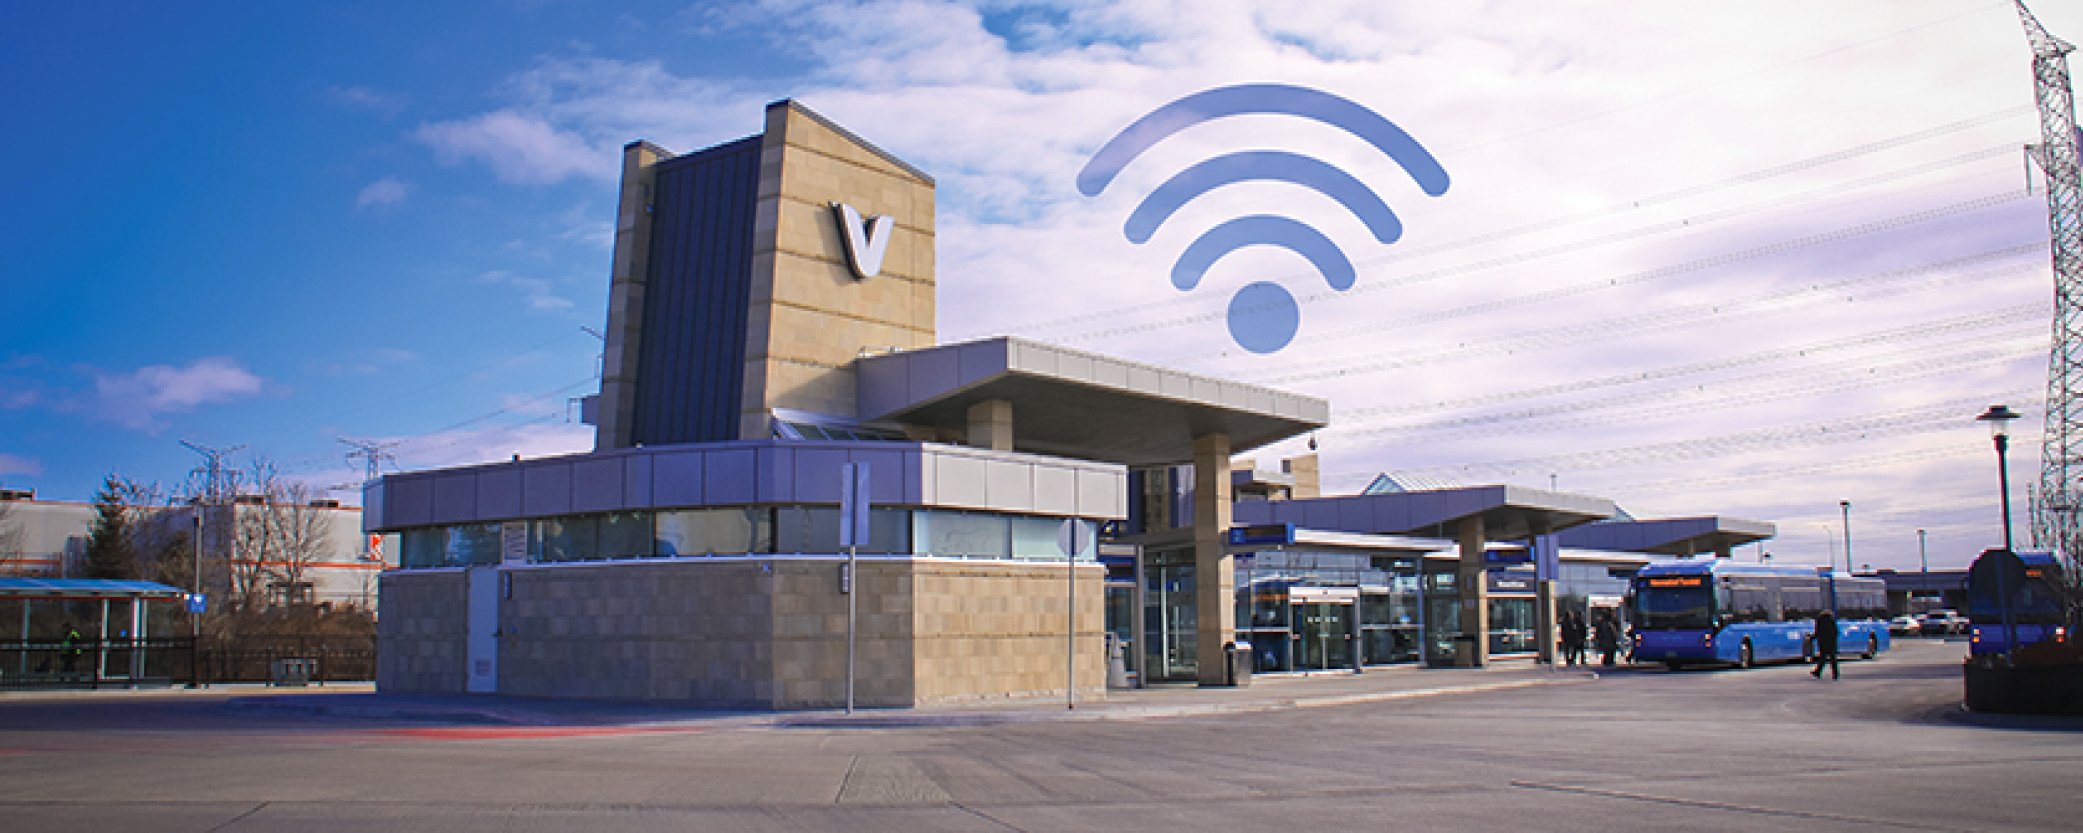 image of the Richmond Hill Centre Terminal with a Wi-Fi icon above